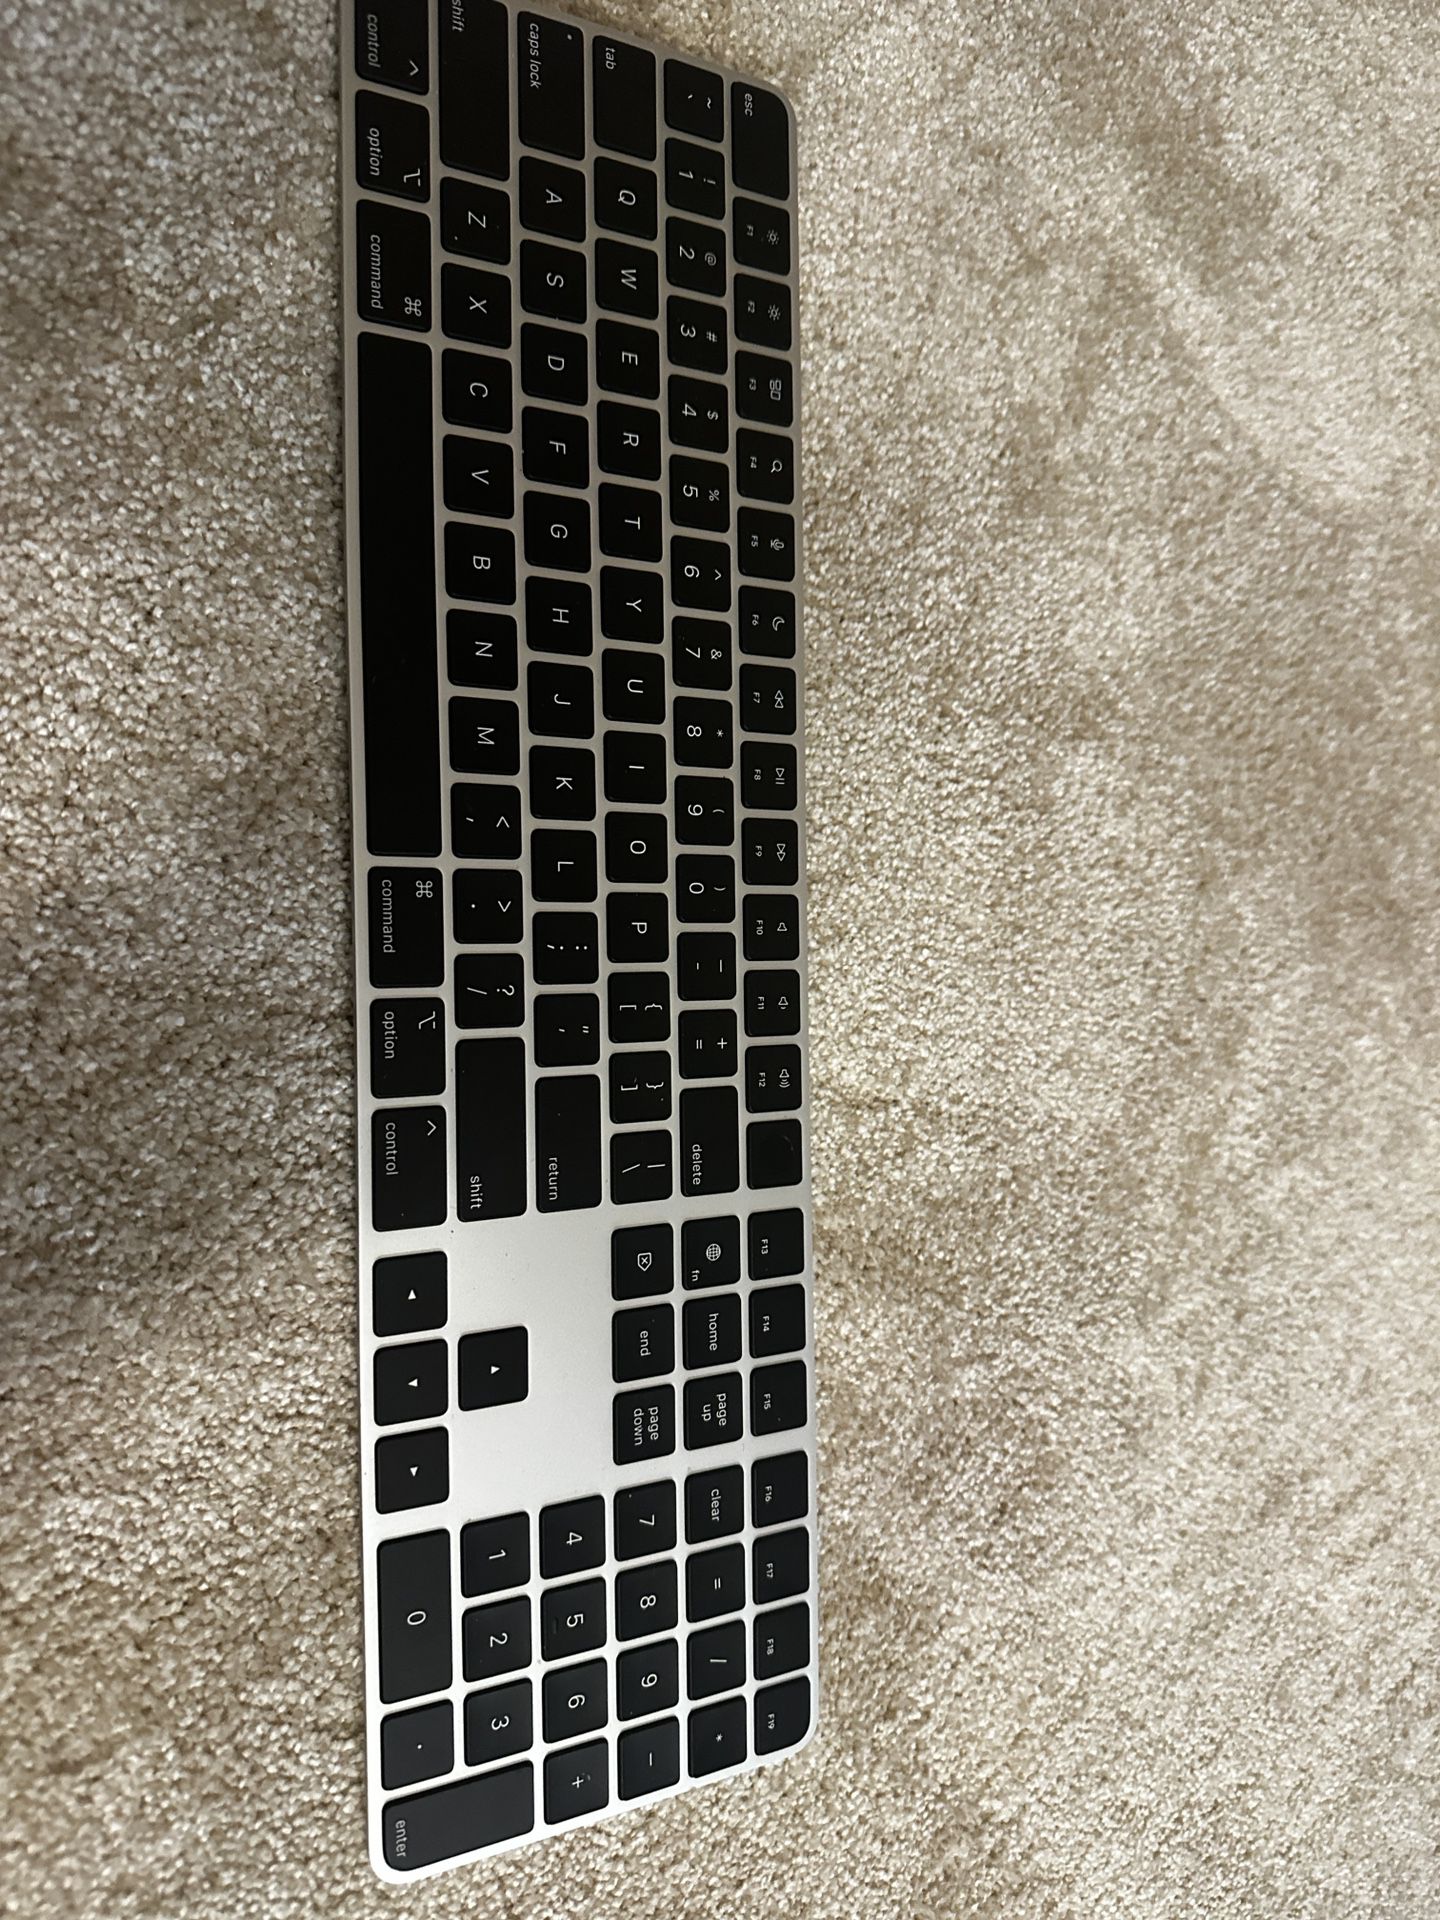 Apple Keyboard, Brand New Never Used